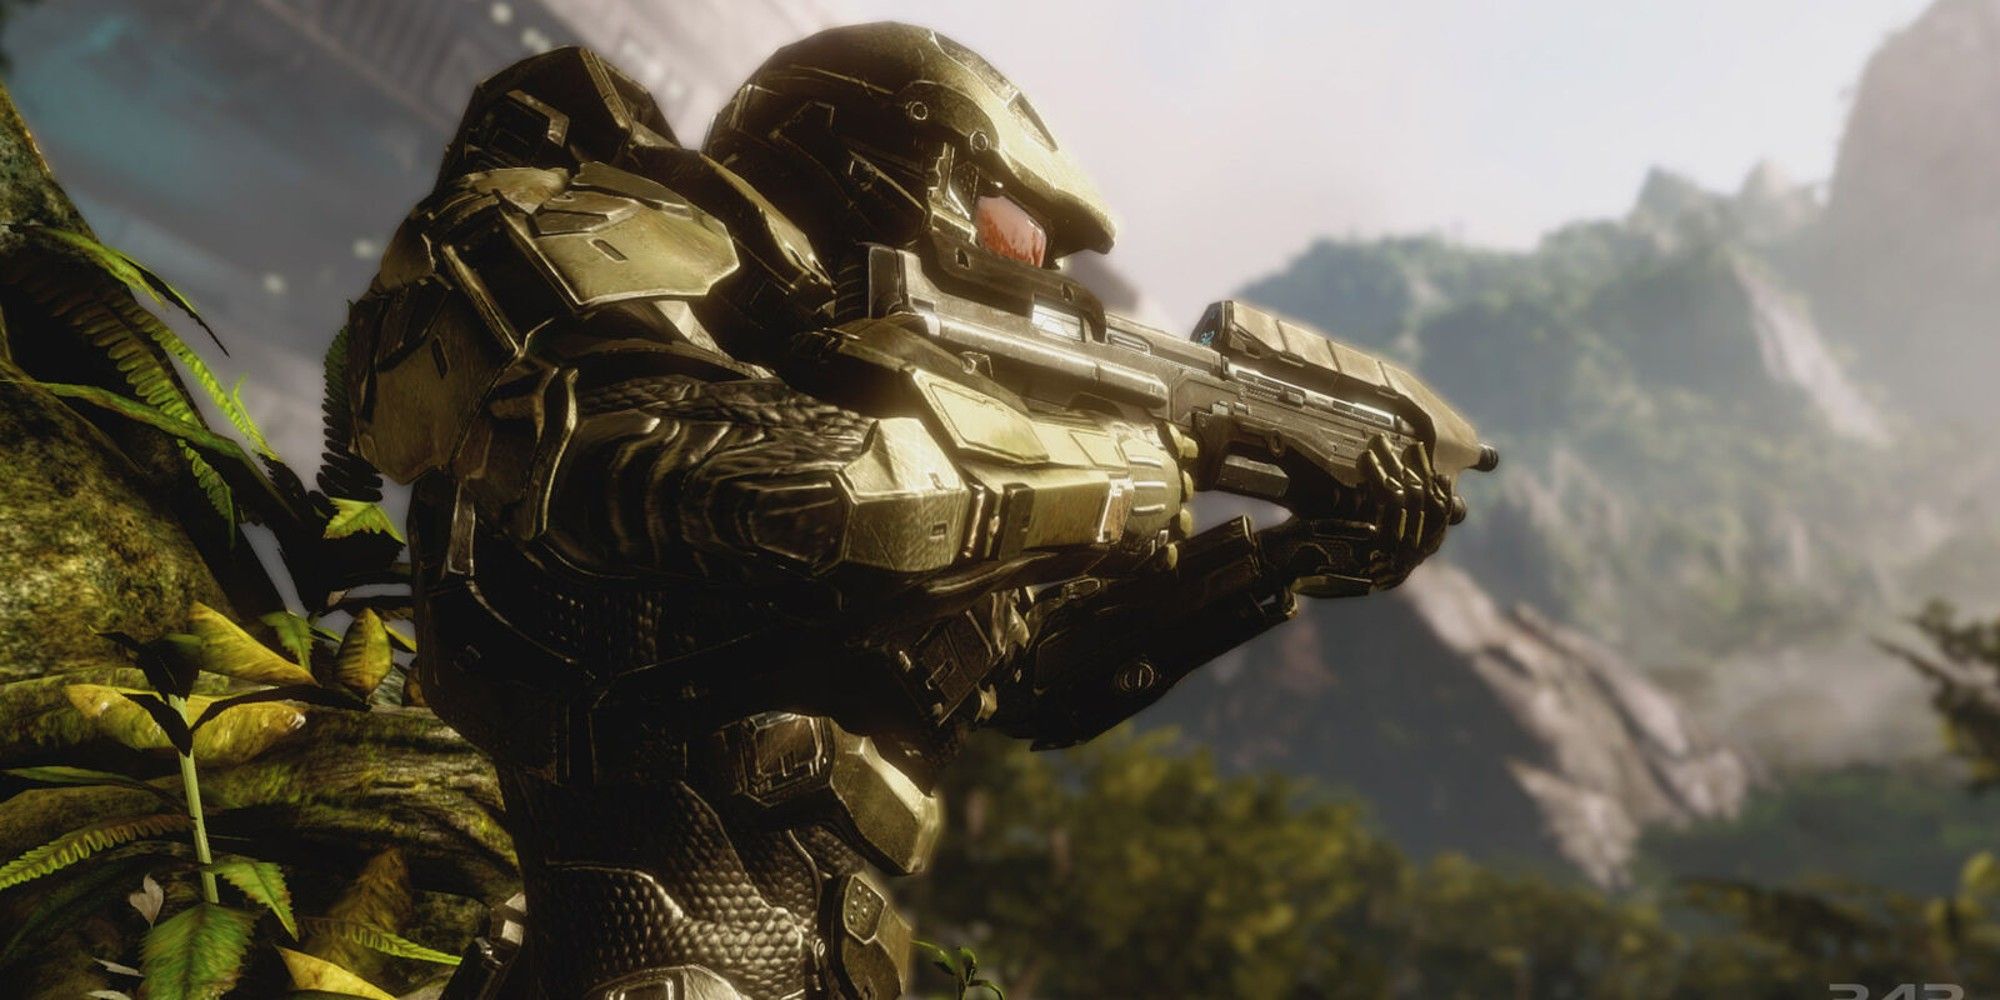 Master Chief surrounded by plants and grass holding a gun and aiming it at something offscreen